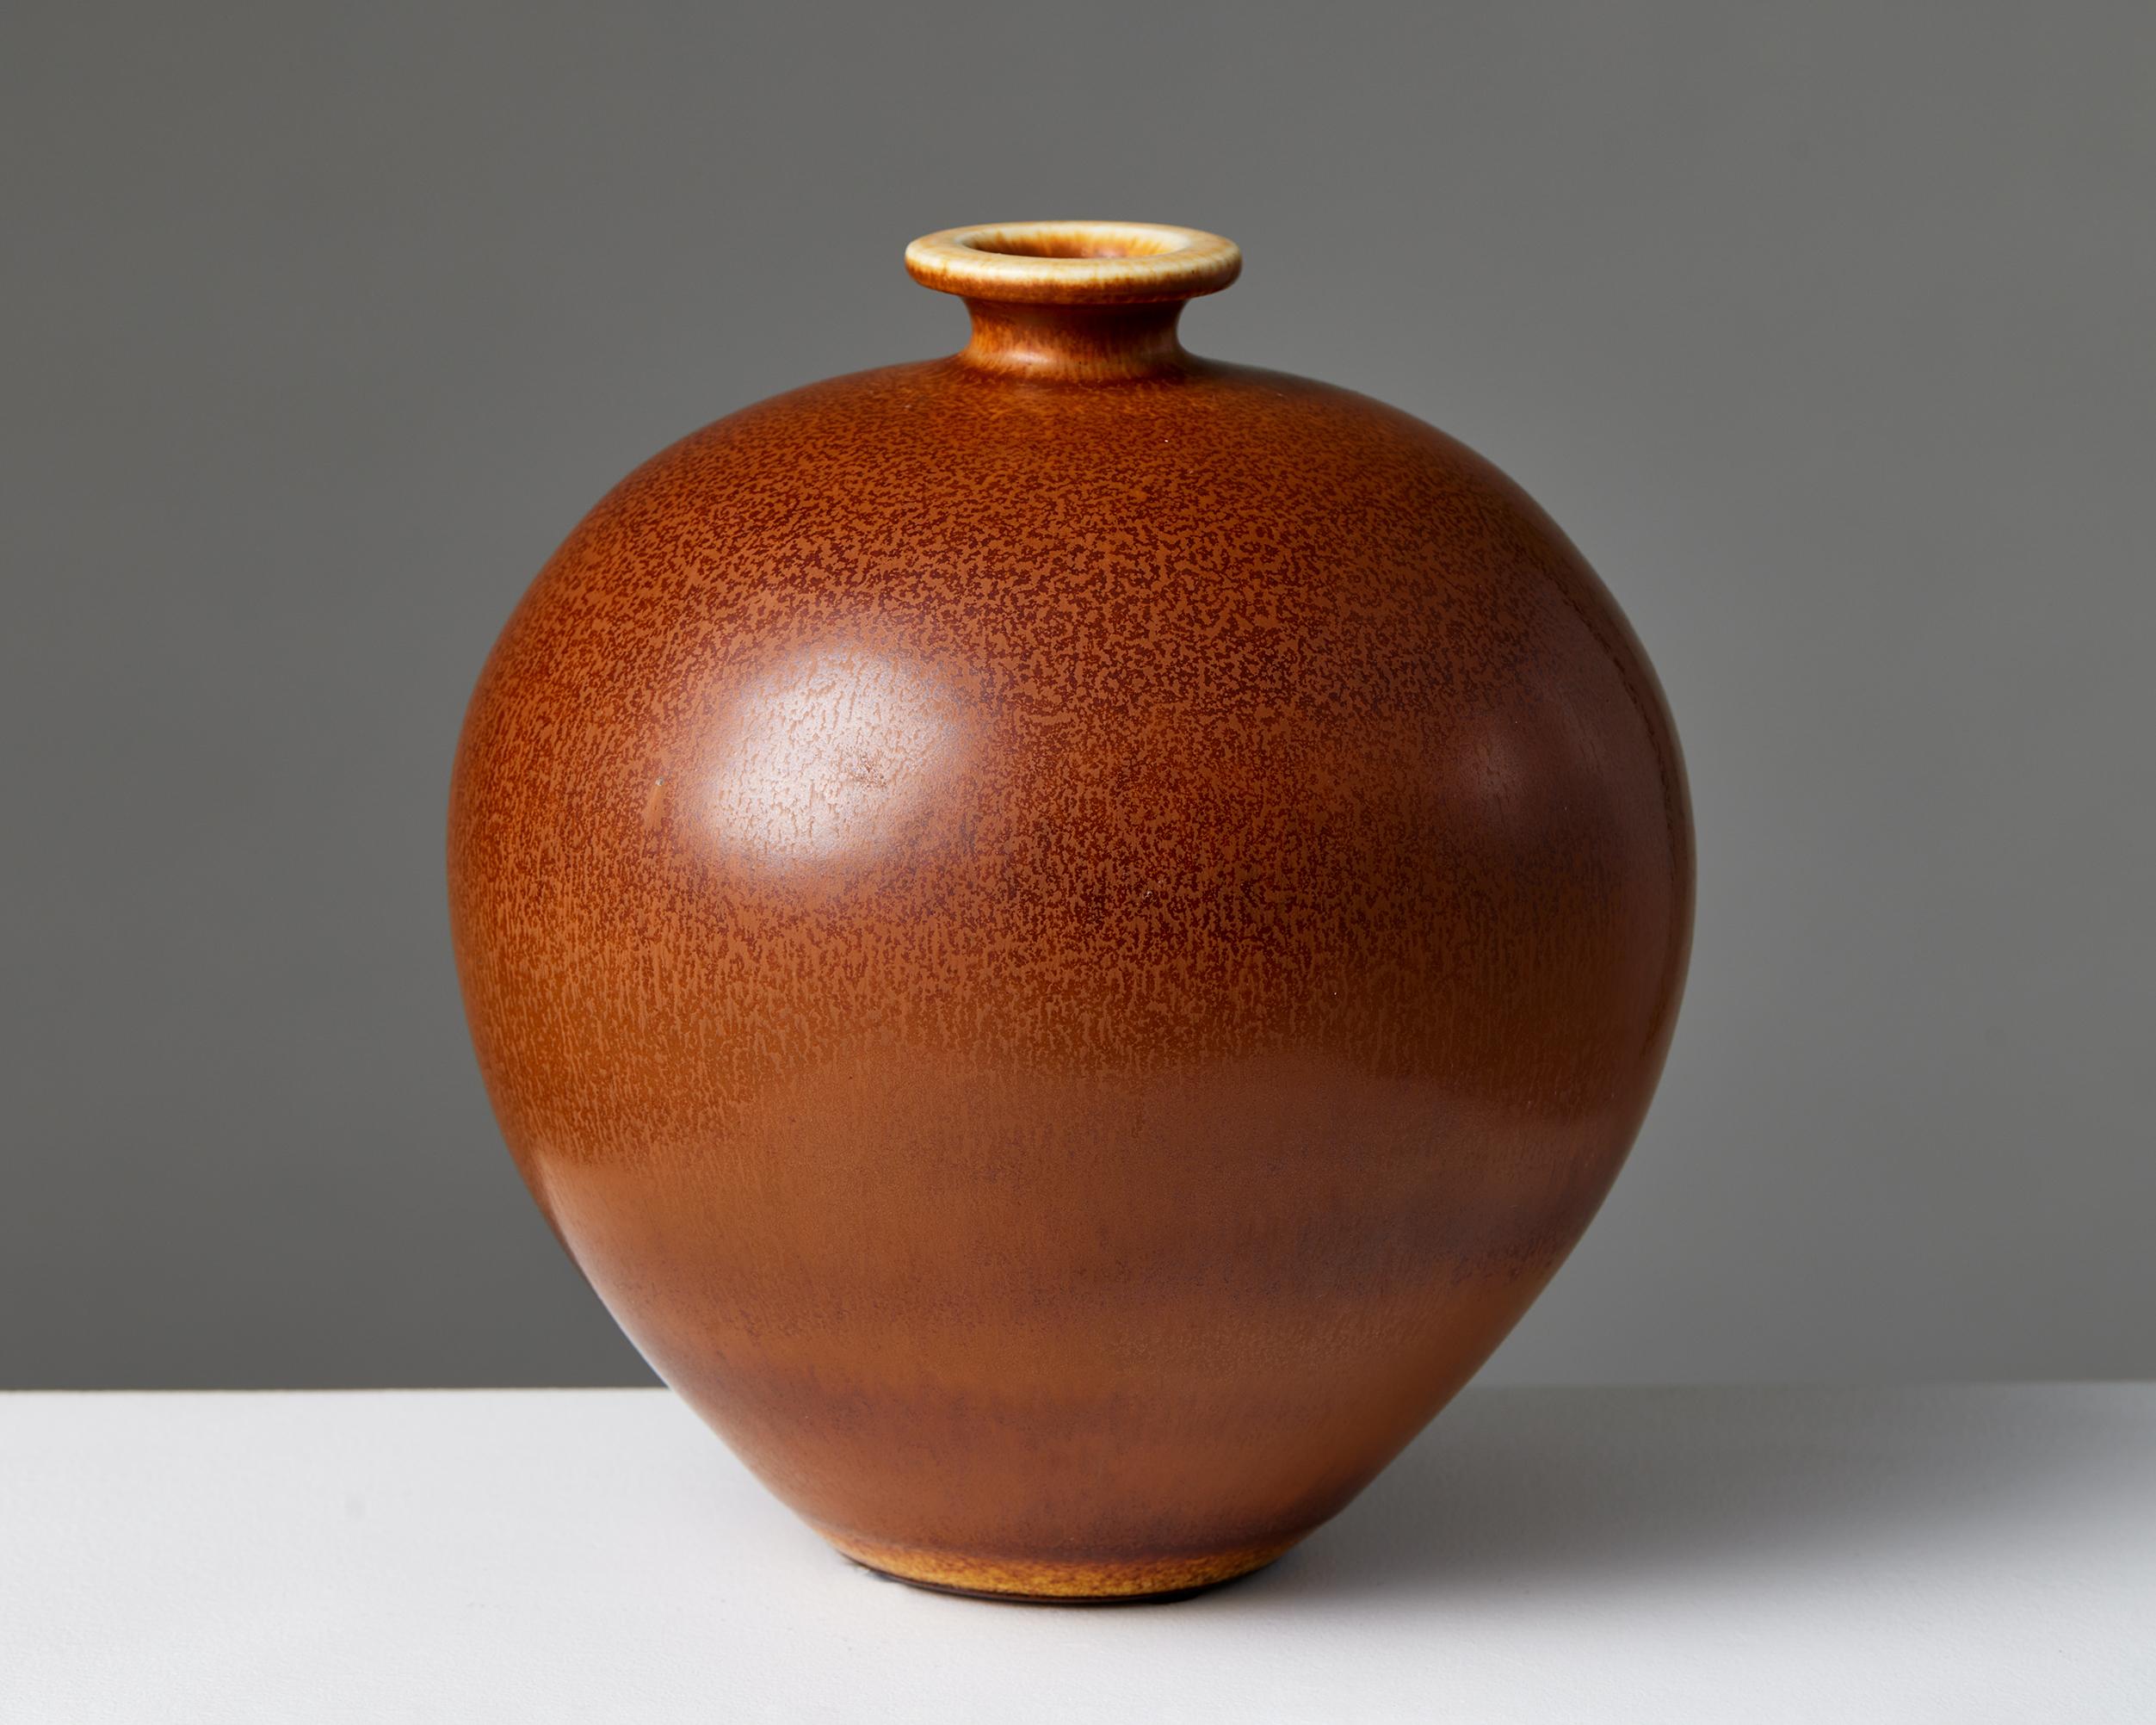 Vase designed by Berndt Friberg for Gustavsberg,
Sweden, 1969.

Stoneware.

Signed.

Measures: H: 20 cm / 8''
D: 18 cm / 7''.

Berndt Friberg was born in the southern Sweden town of Hoganas. He came from a long line of ceramists, in an area steeped